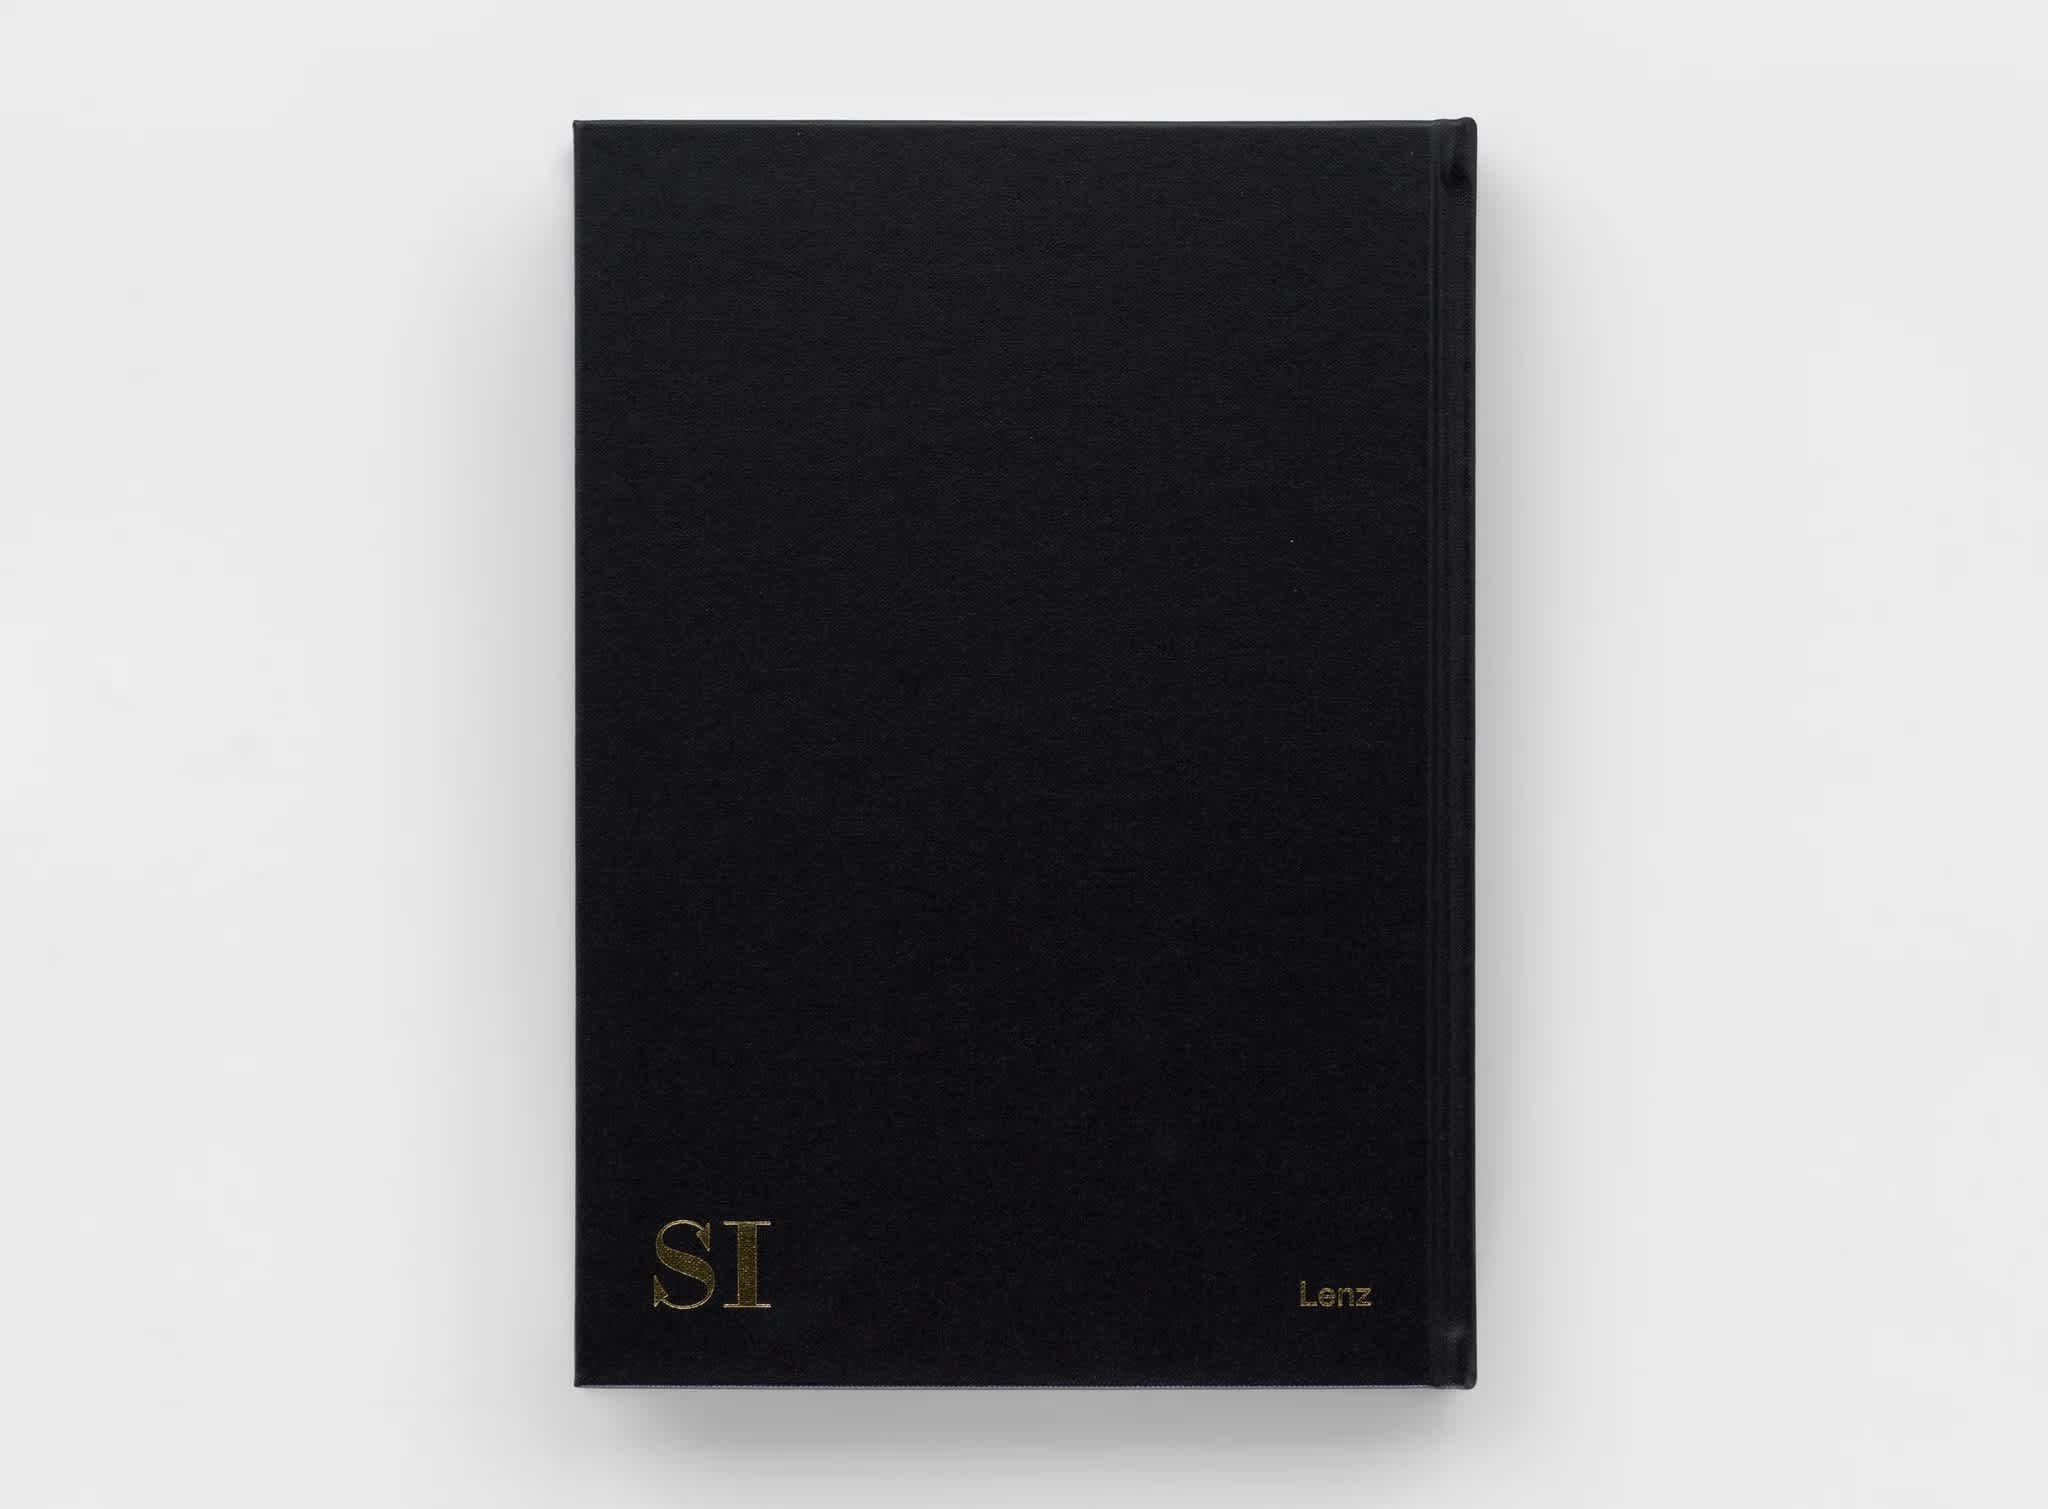 Back cover of a black book. "SI" is embossed in gold on the bottom left corner.